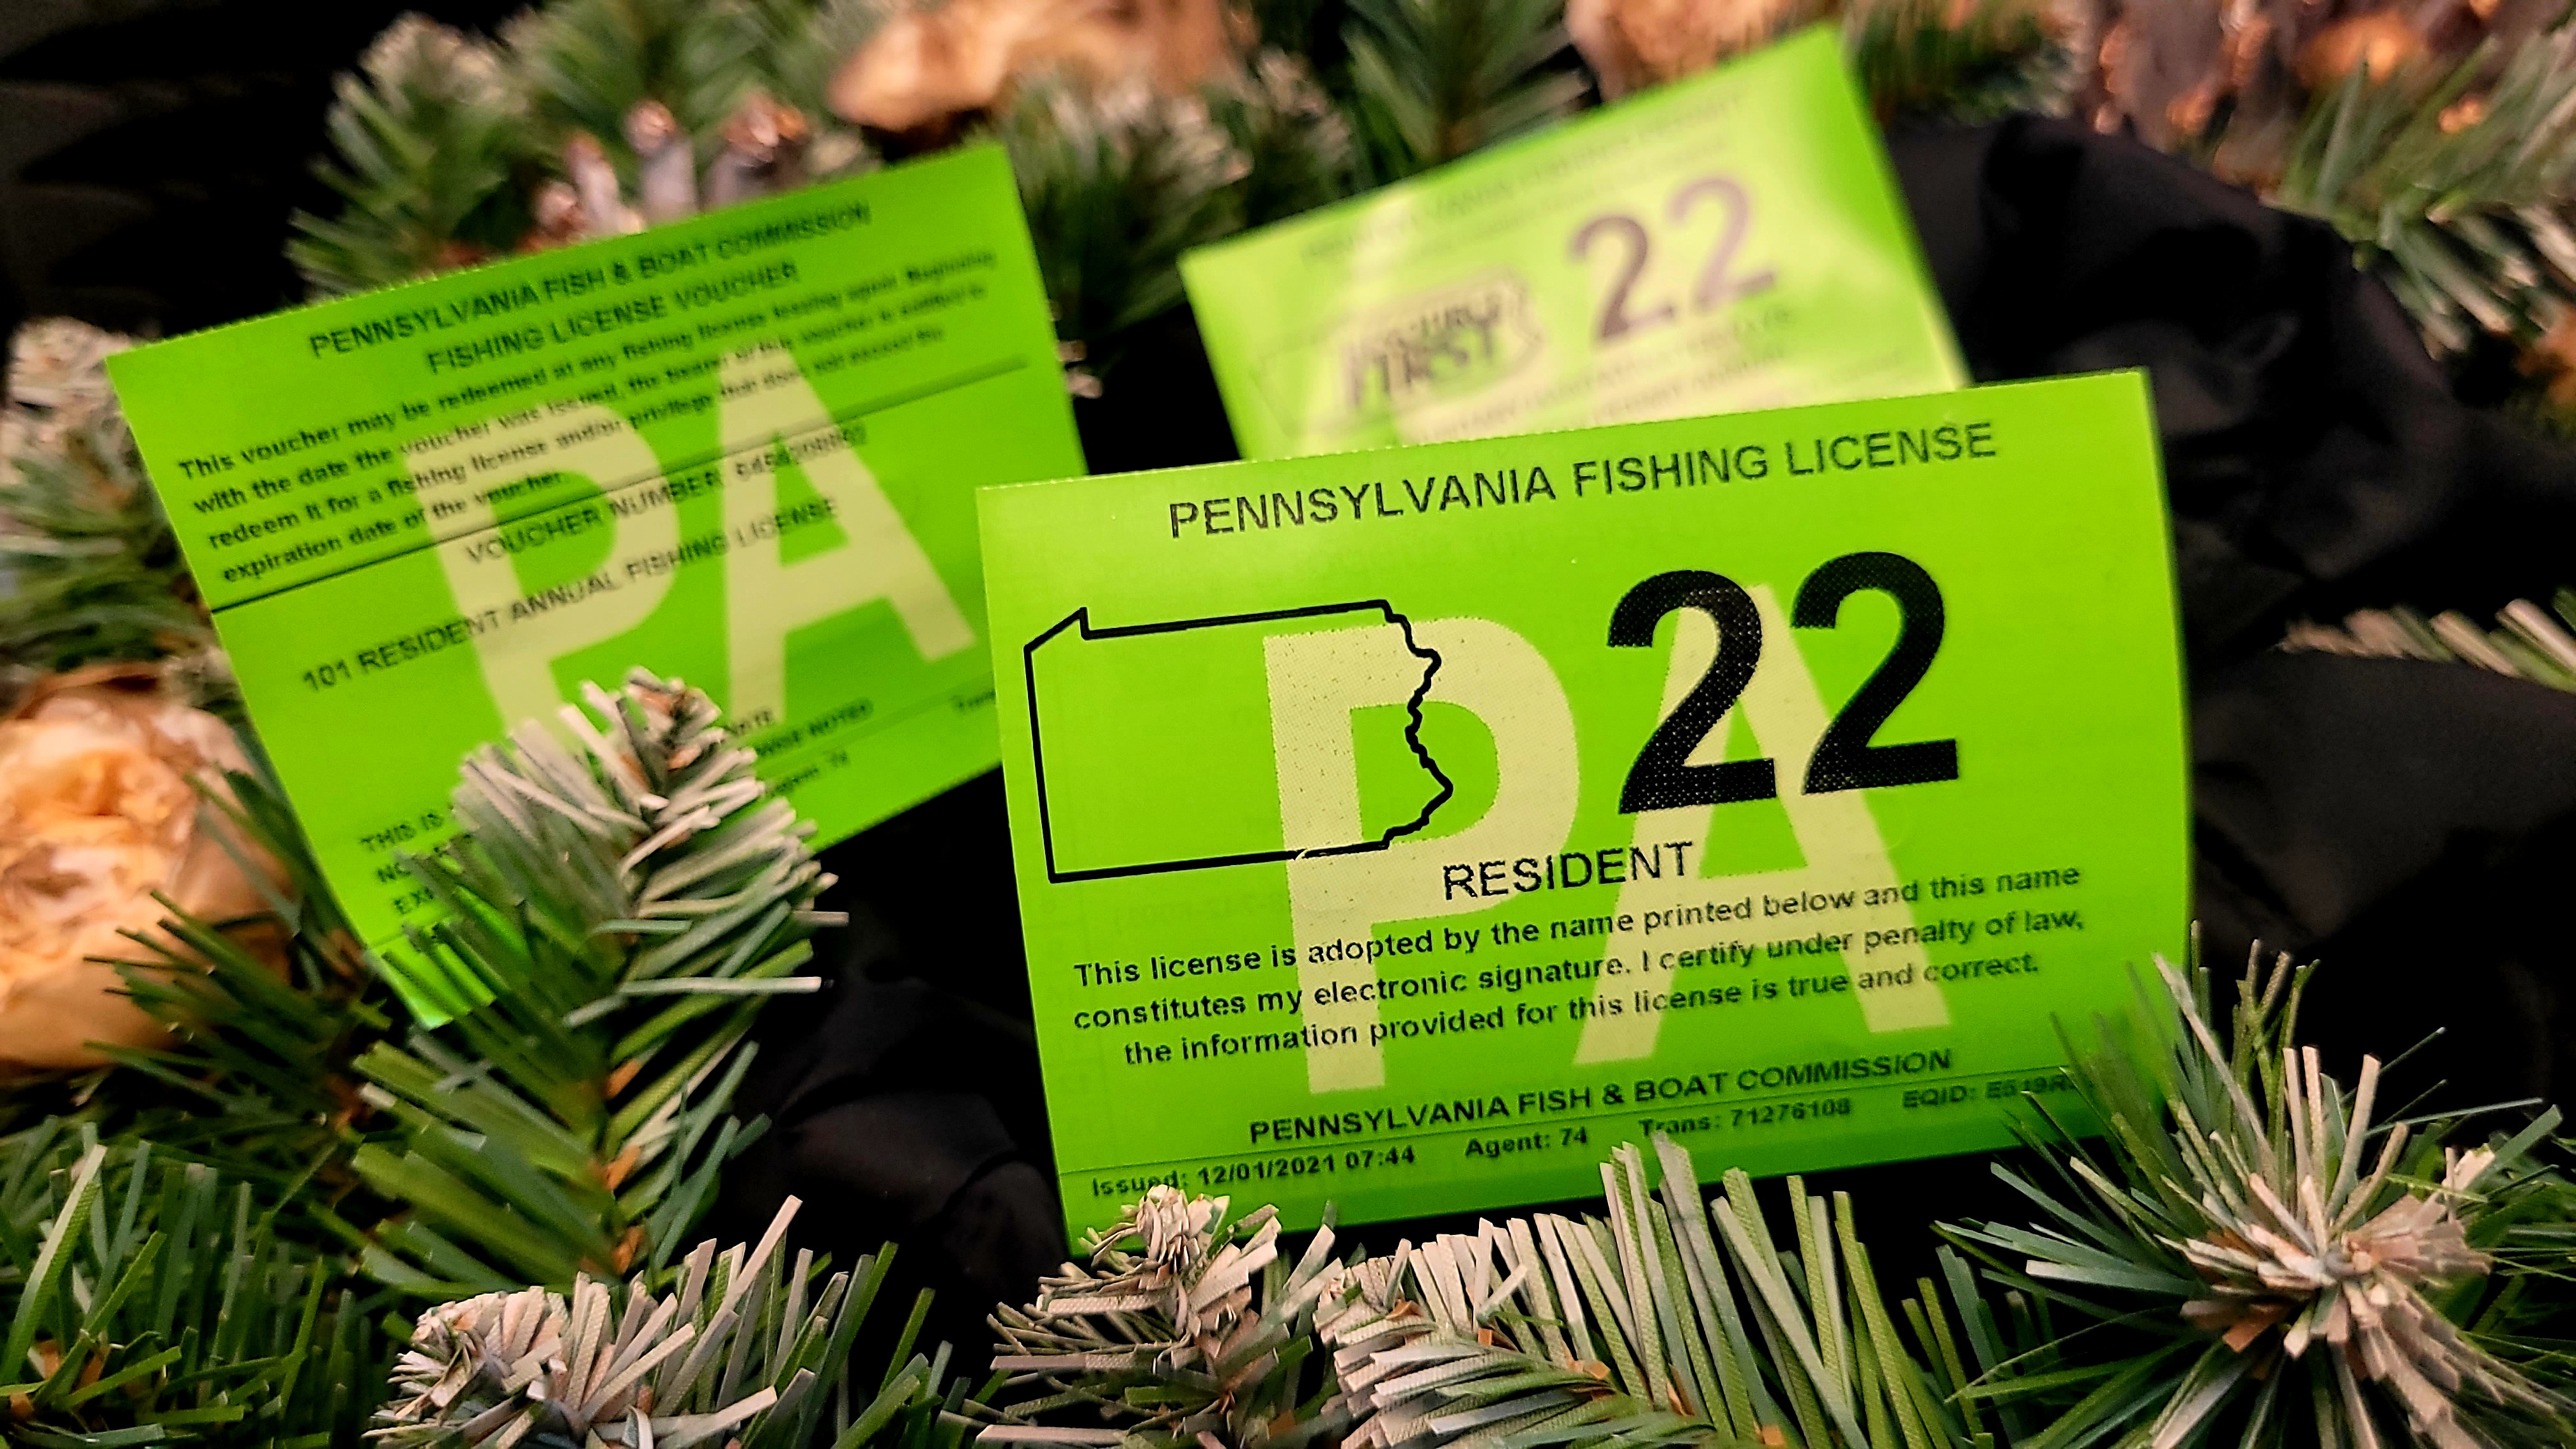 2022 PENNSYLVANIA FISHING LICENSES, PERMITS, AND GIFT VOUCHERS ARE ON SALE  BEGINNING DECEMBER 1!